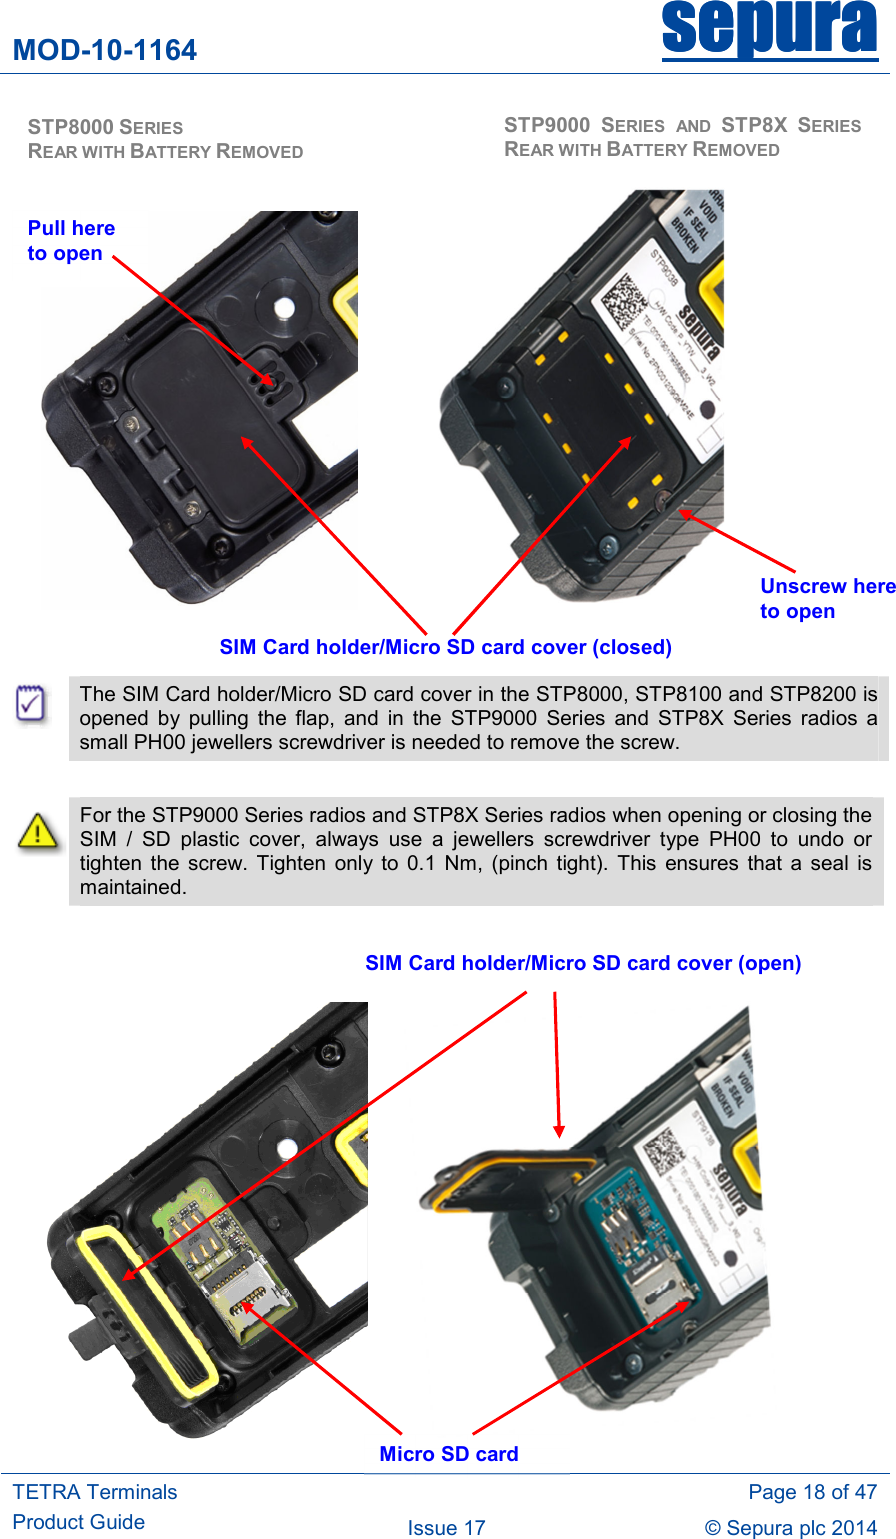 MOD-10-1164 sepurasepurasepurasepura     TETRA Terminals Product Guide   Page 18 of 47 Issue 17  © Sepura plc 2014                                 The SIM Card holder/Micro SD card cover in the STP8000, STP8100 and STP8200 is opened  by  pulling  the  flap,  and  in  the  STP9000  Series  and  STP8X  Series  radios  a small PH00 jewellers screwdriver is needed to remove the screw.   For the STP9000 Series radios and STP8X Series radios when opening or closing the SIM  /  SD  plastic  cover,  always  use  a  jewellers  screwdriver  type  PH00  to  undo  or tighten  the  screw. Tighten  only  to  0.1  Nm,  (pinch  tight).  This  ensures  that  a seal  is maintained.                SIM Card holder/Micro SD card cover (closed) SIM Card holder/Micro SD card cover (open) Micro SD card  STP8000 SERIES                            REAR WITH BATTERY REMOVED  STP9000 SERIES  AND  STP8X SERIES REAR WITH BATTERY REMOVED Unscrew here to open Pull here to open 